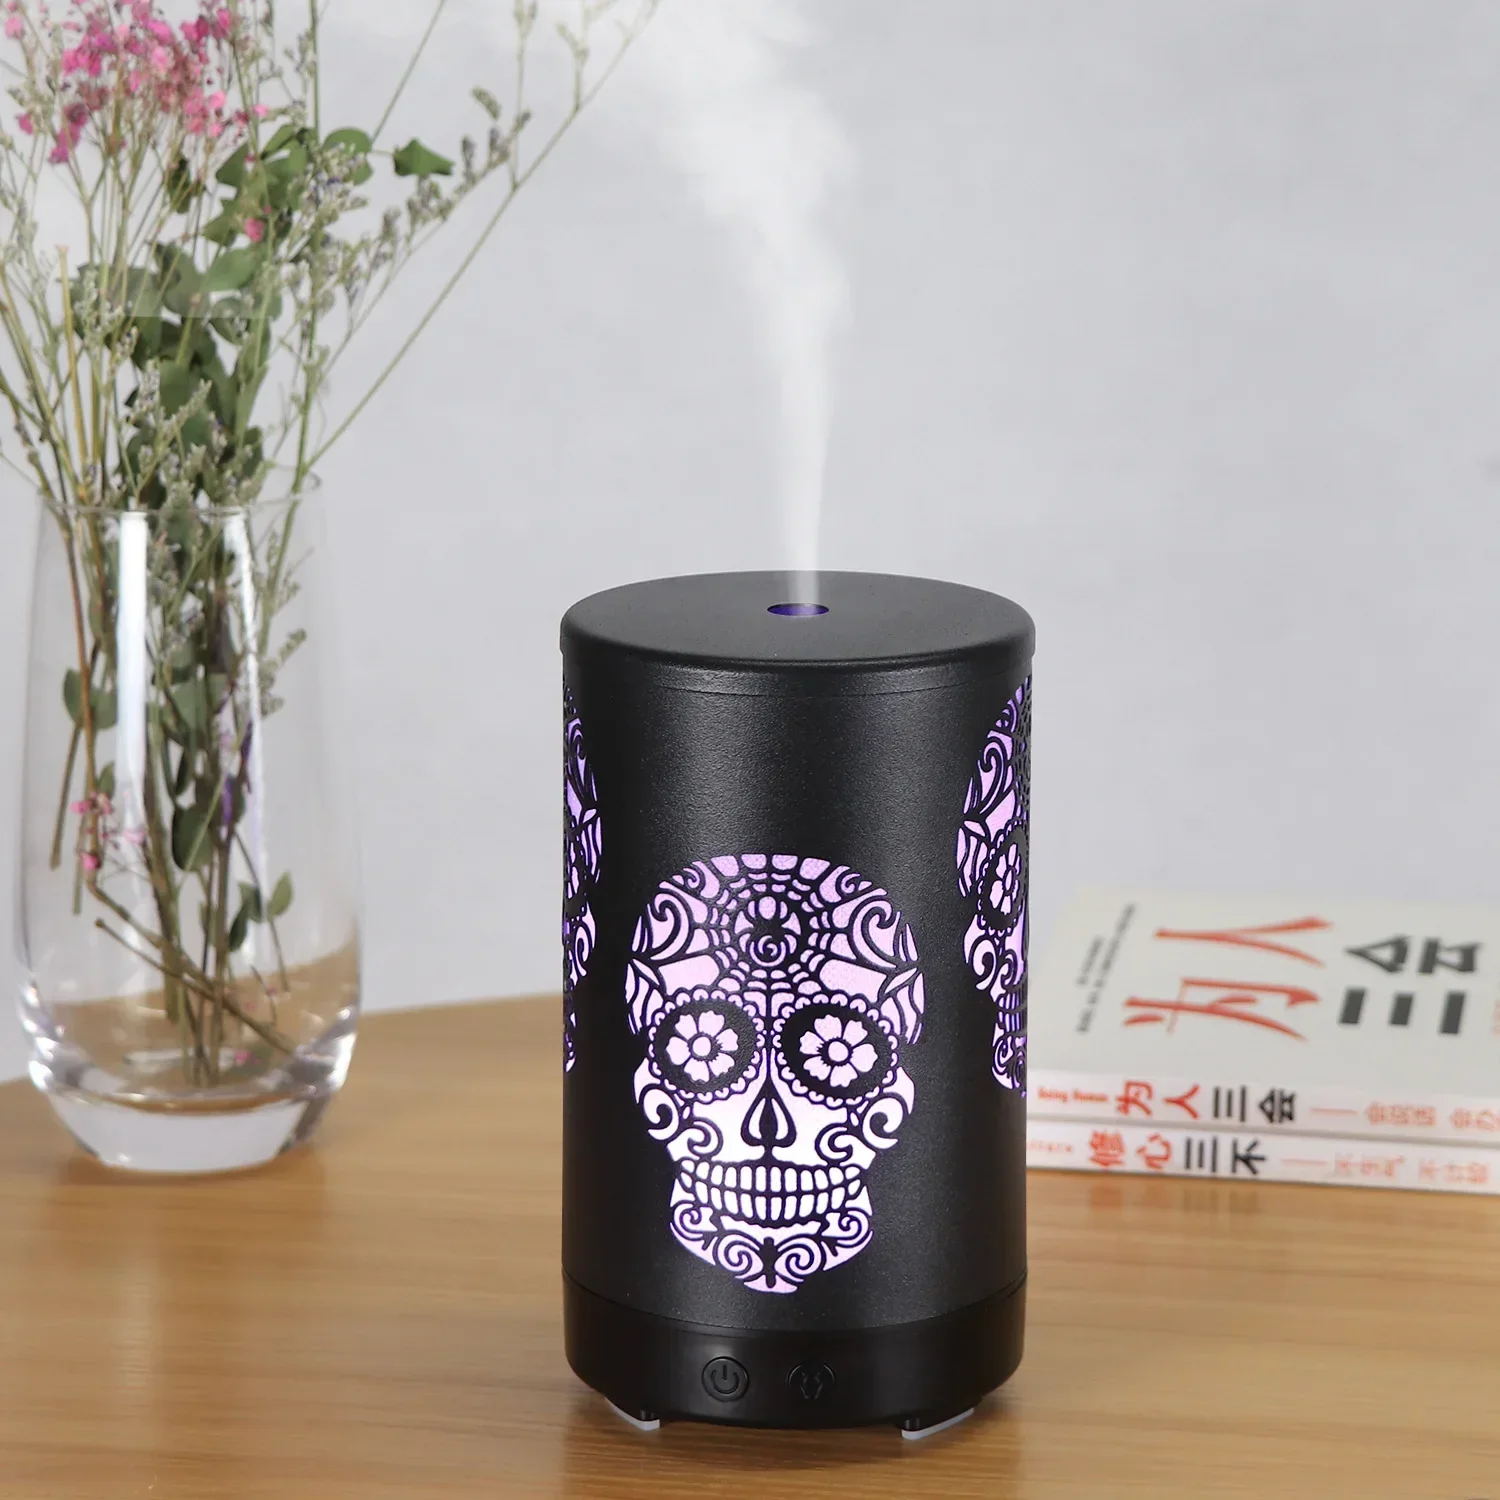 100ml Ultrasonic Cool Mist Maker Aroma Diffusor Creative Skull Aromatherapy Diffuser Air Humidifier 7 Color Changing LED Light